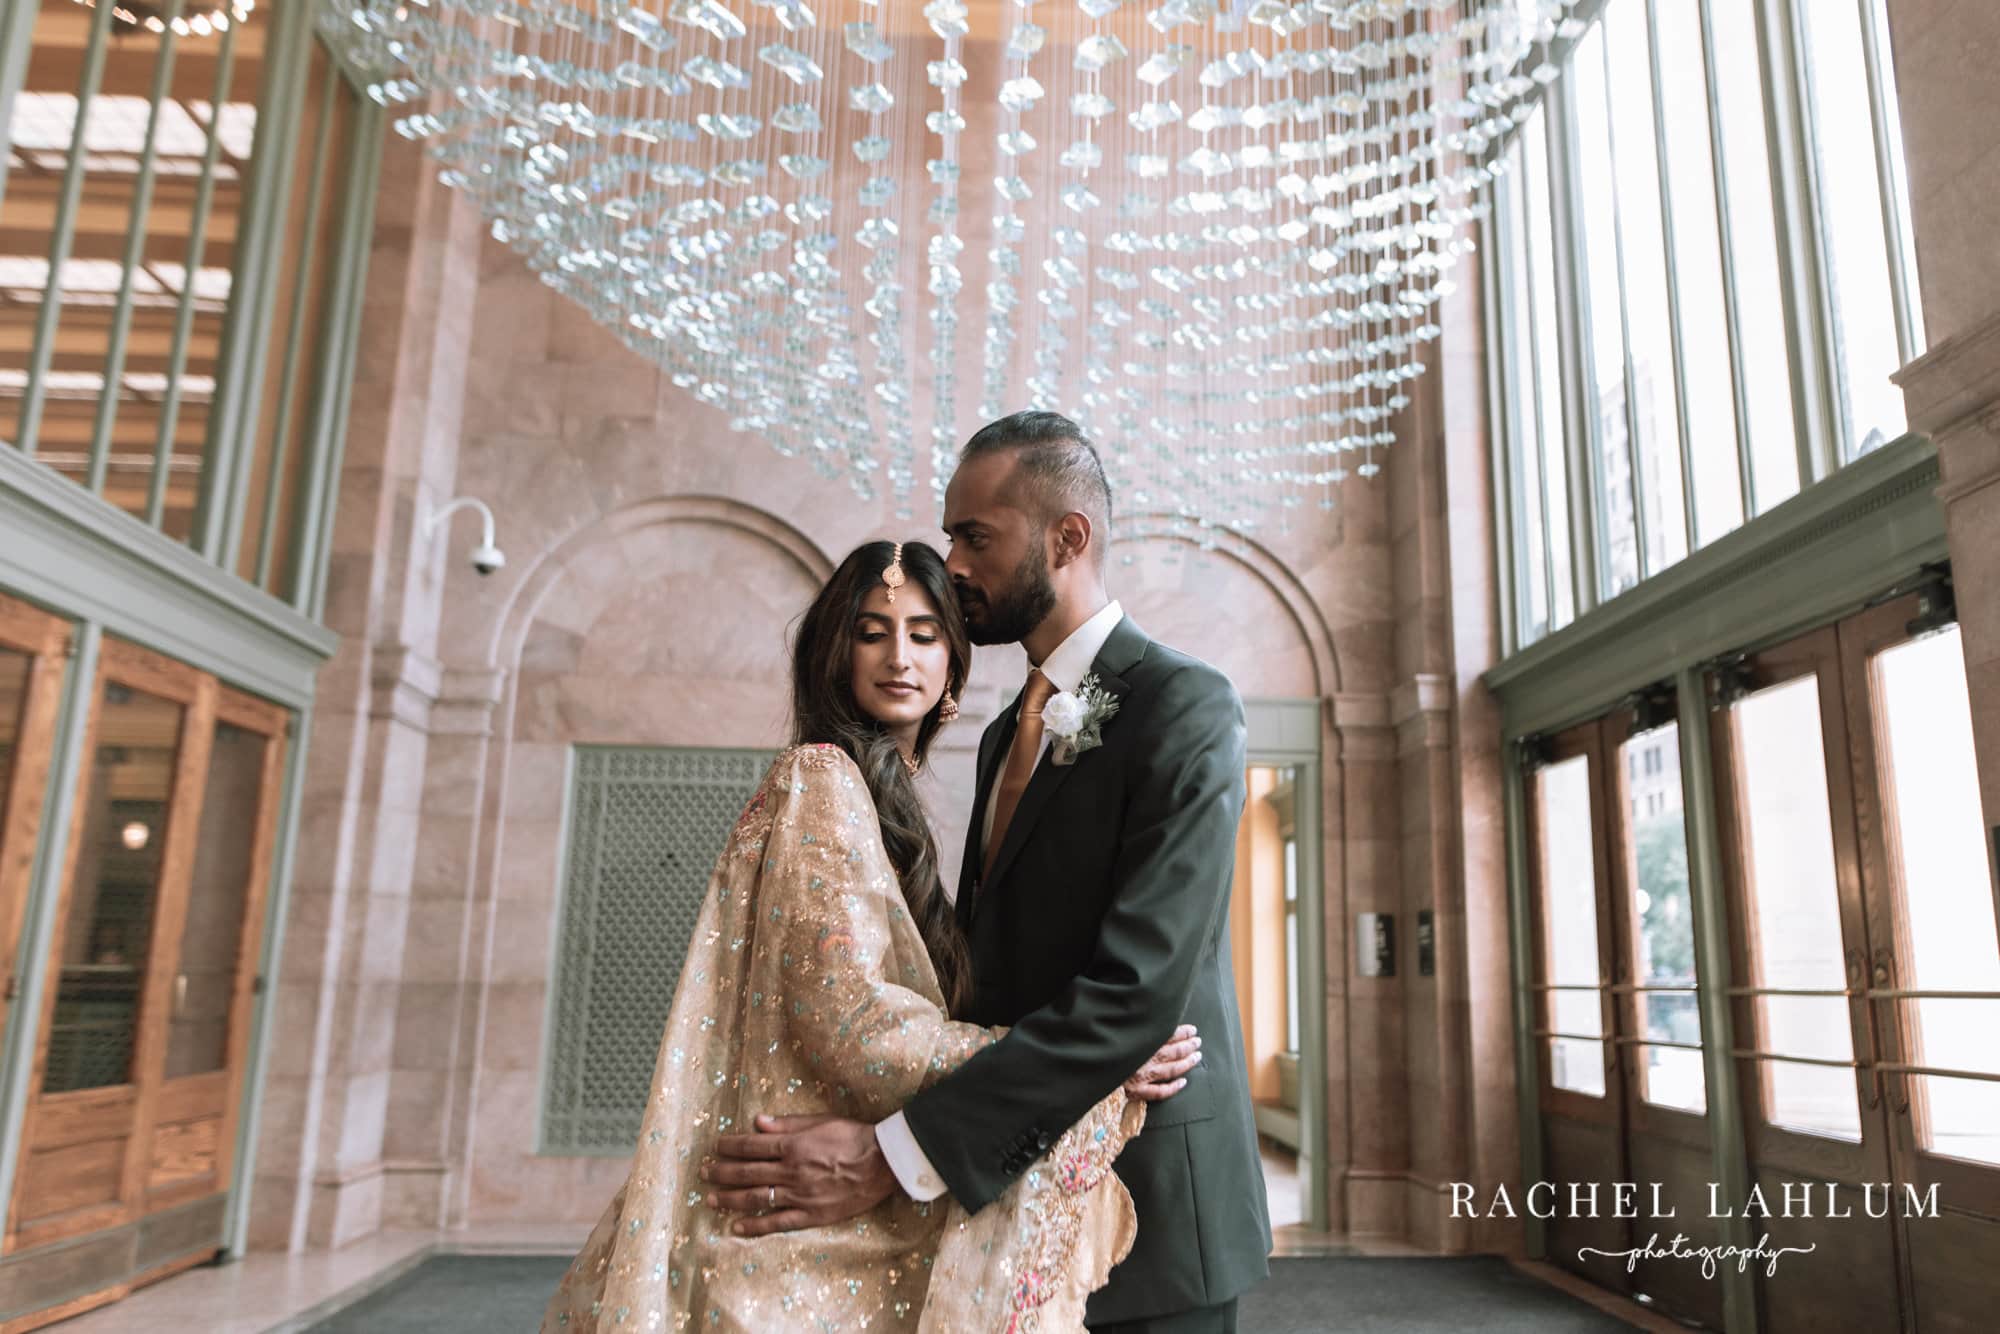 Bride and groom embrace inside the lobby of the Intercontinental with glass ceiling decorations above. 